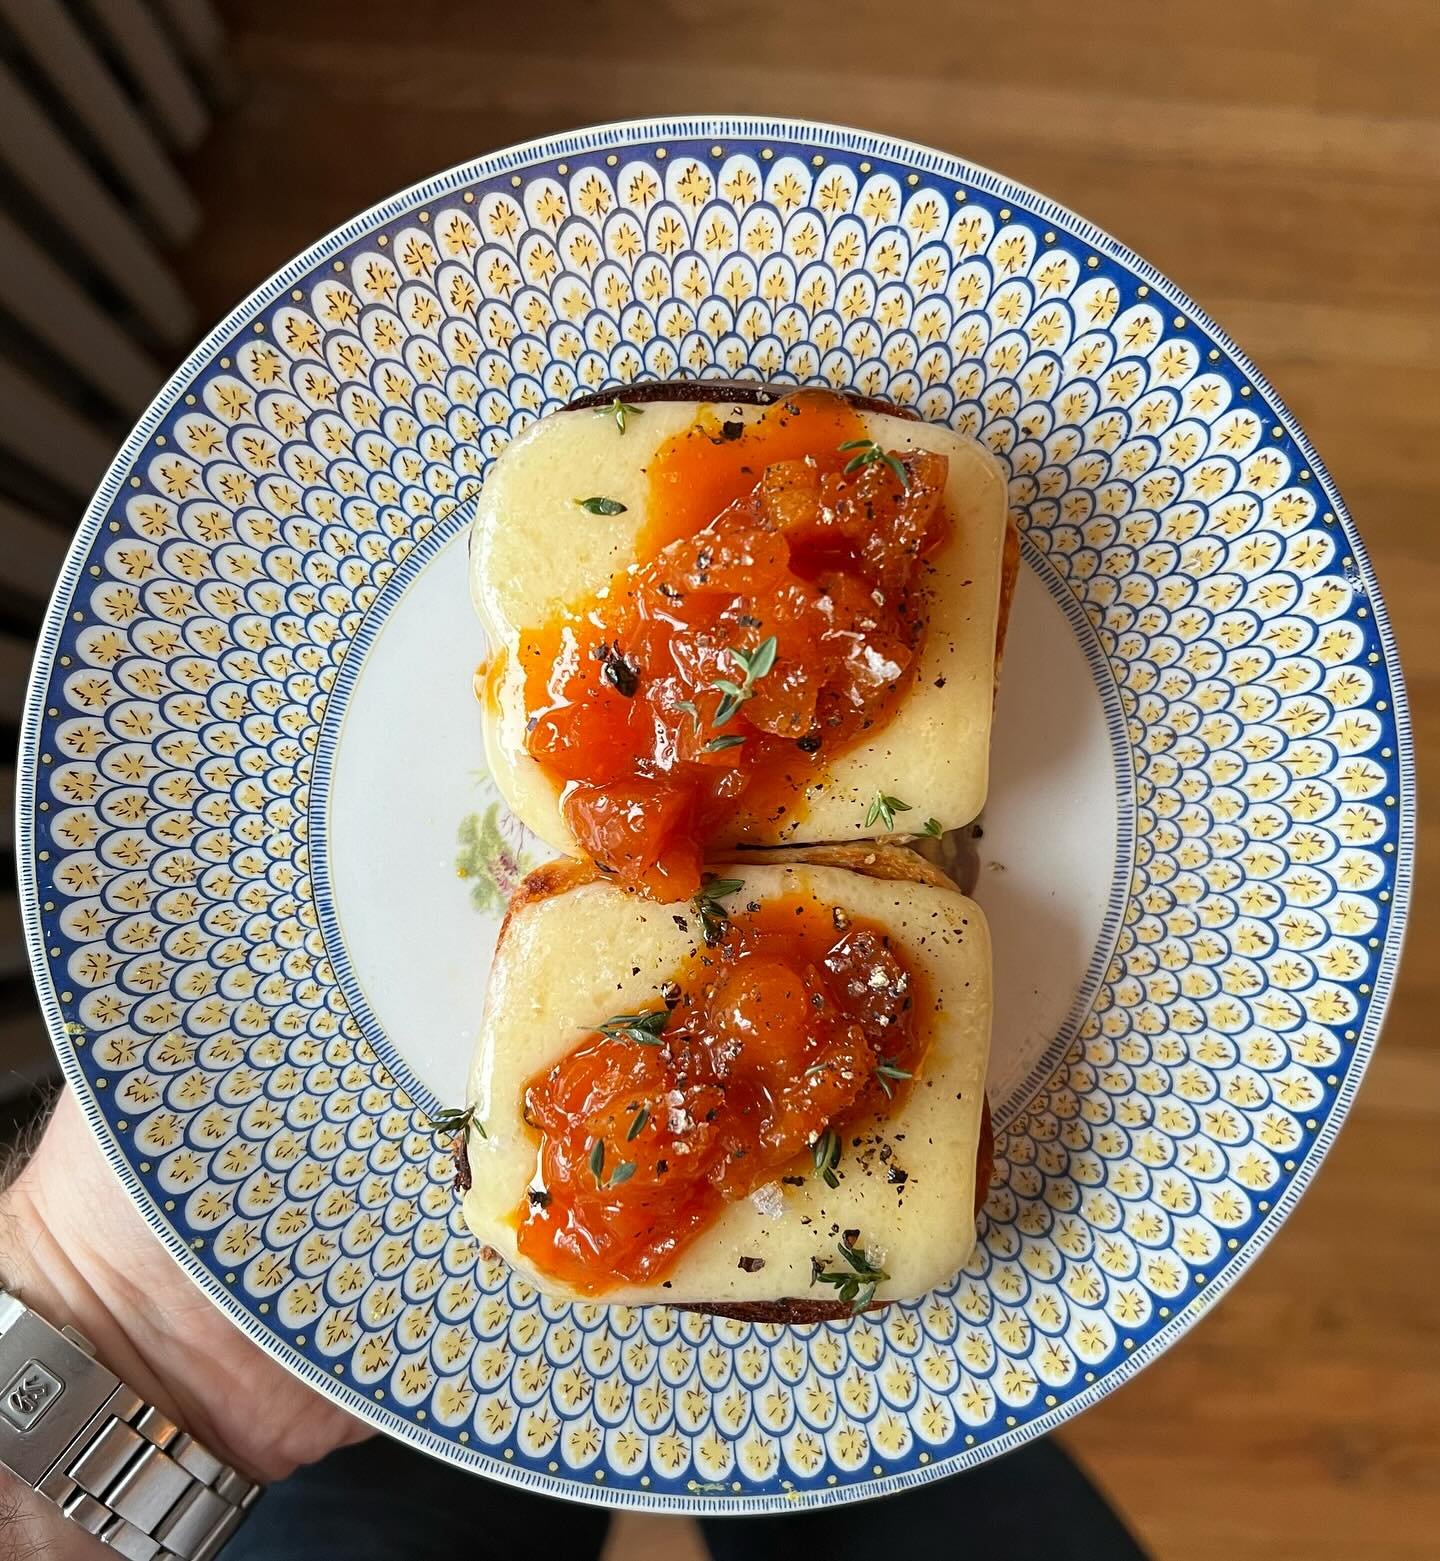 SPEC du JOUR for thurs, 4.11 - fuggin CHEEZY TOAST. fresh brioche, @laiteriecharlevoix le 1608 fromage, apricot jam that chef whipped up, a touch of thyme. just great for a rainy day like today come smash ⚜️🍞🧀🍑⚜️🍞🧀🍑⚜️🍞🧀🍑⚜️🍞🧀🍑⚜️🍞🧀🍑⚜️🍞?